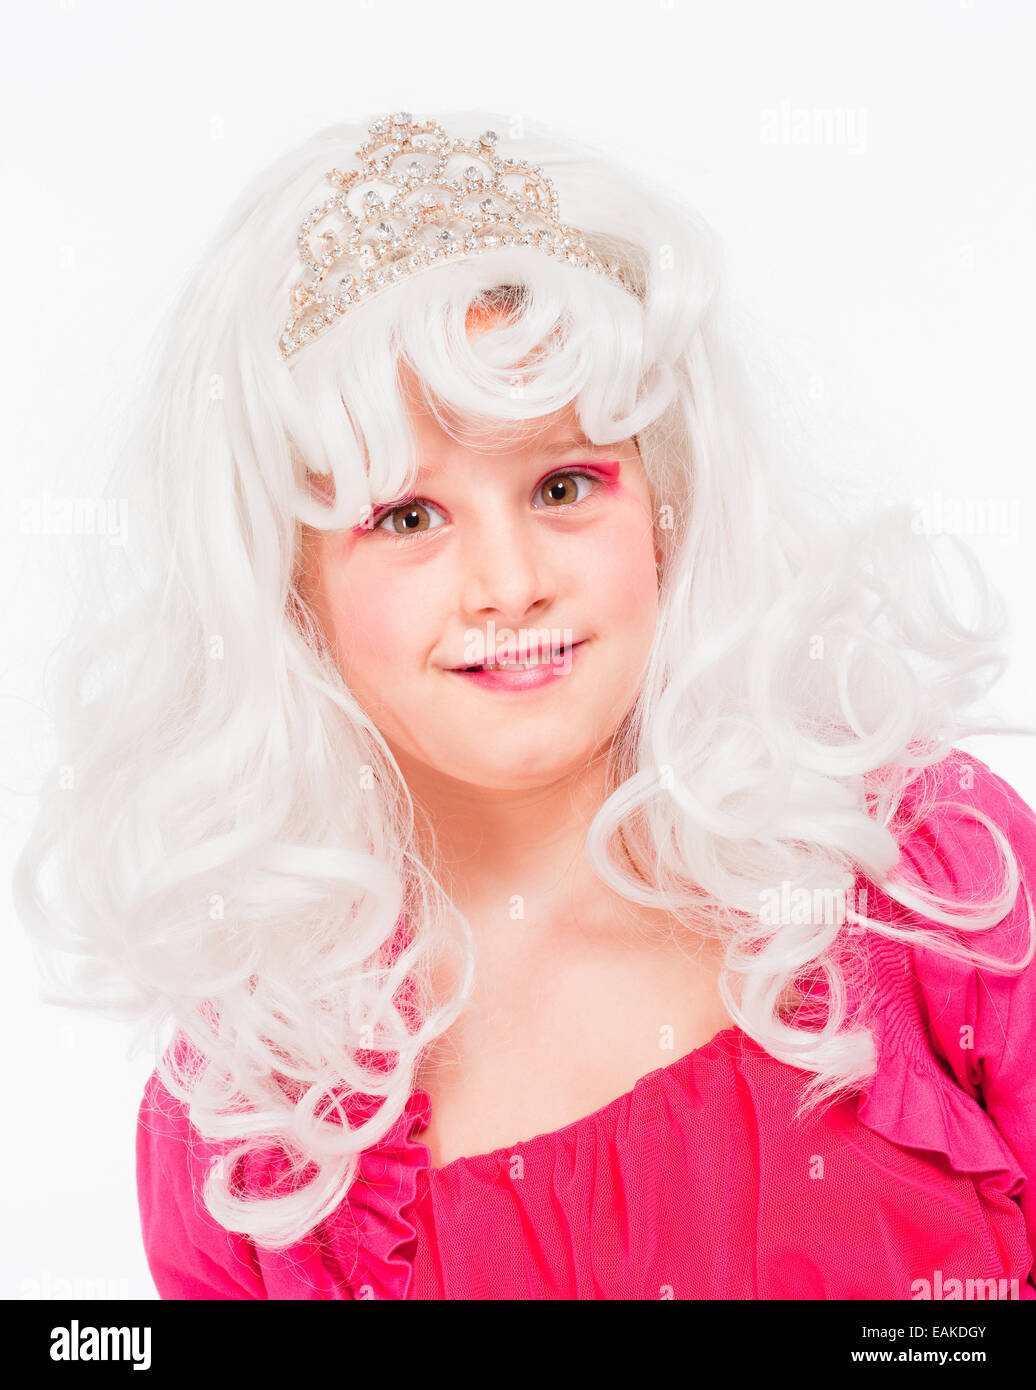 Young Girl in White Wig and Diadem Posing as Princess Stock Photo